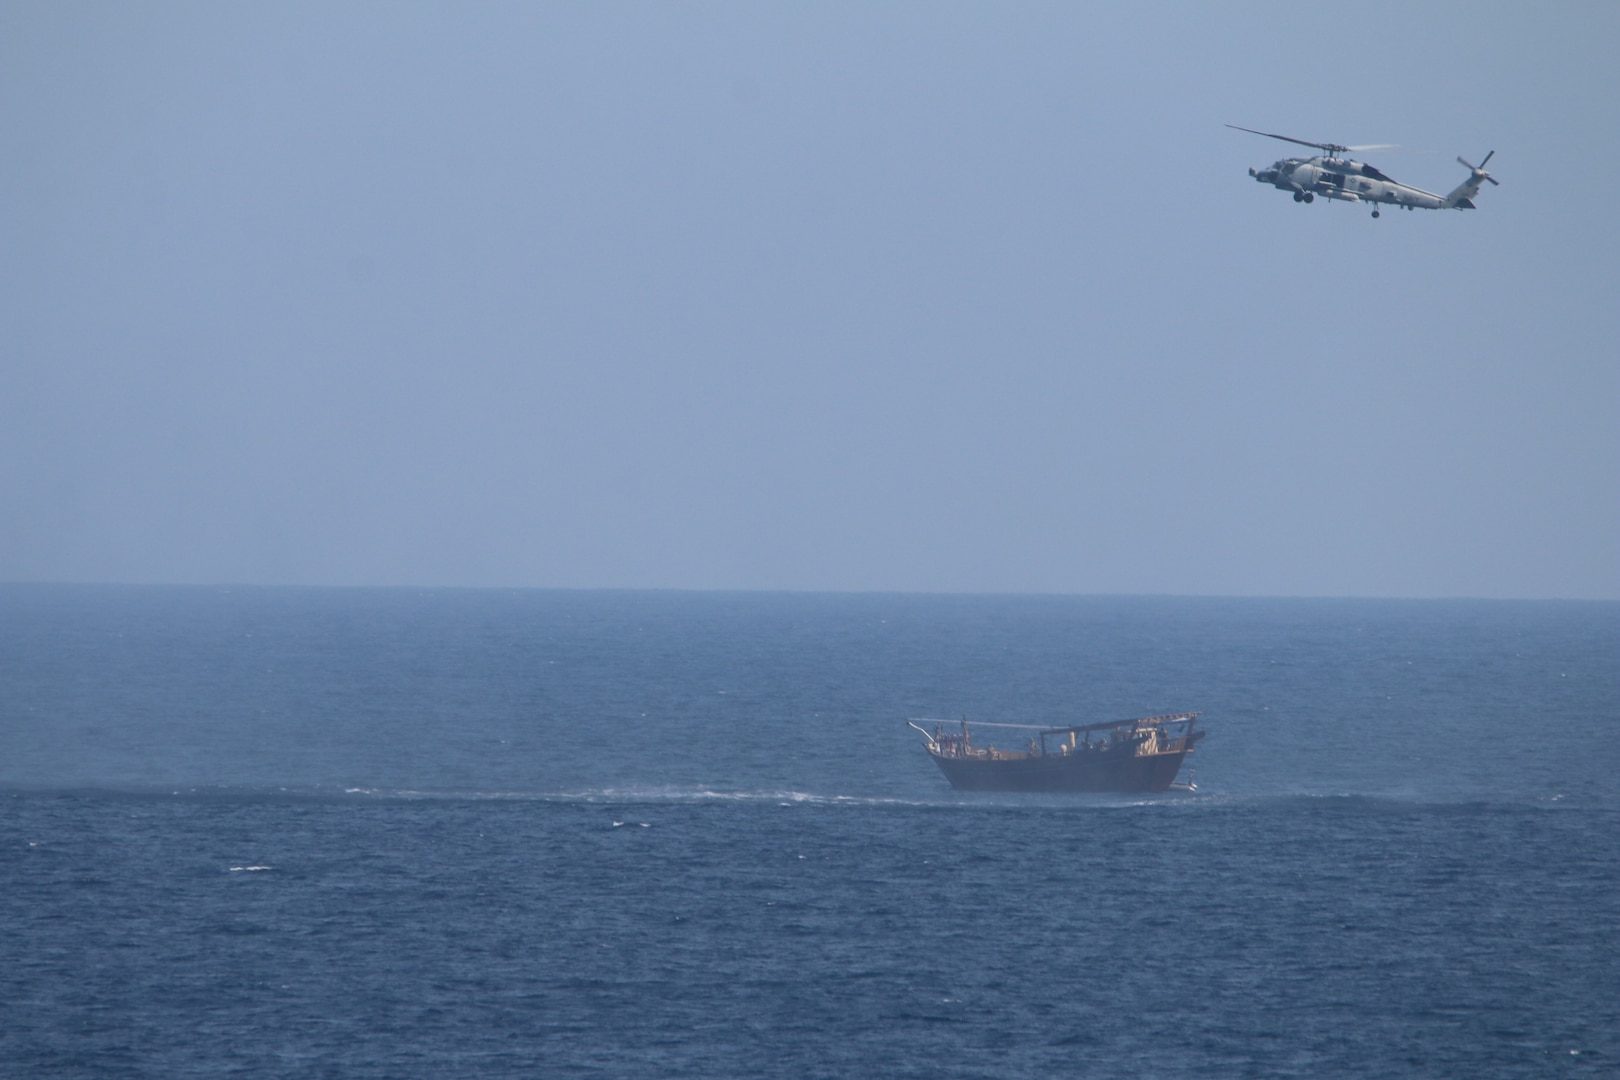 210506-N-NO146-1004 NORTH ARABIAN SEA (May 6, 2021)  An SH-60 Seahawk helicopter assigned to the guided-missile cruiser USS Monterey (CG 61)(not shown) flies above a stateless dhow interdicted with a shipment of illicit weapons in international waters of the North Arabian Sea on May 6-7. Maritime security operations, as conducted by the U.S. Fifth Fleet, entail routine patrols to determine pattern of life in the maritime as well as to enhance mariner-to-mariner relations. These operations reassure allies and partners and preserve freedom of navigation and free flow of commerce (U.S. Navy Photo)